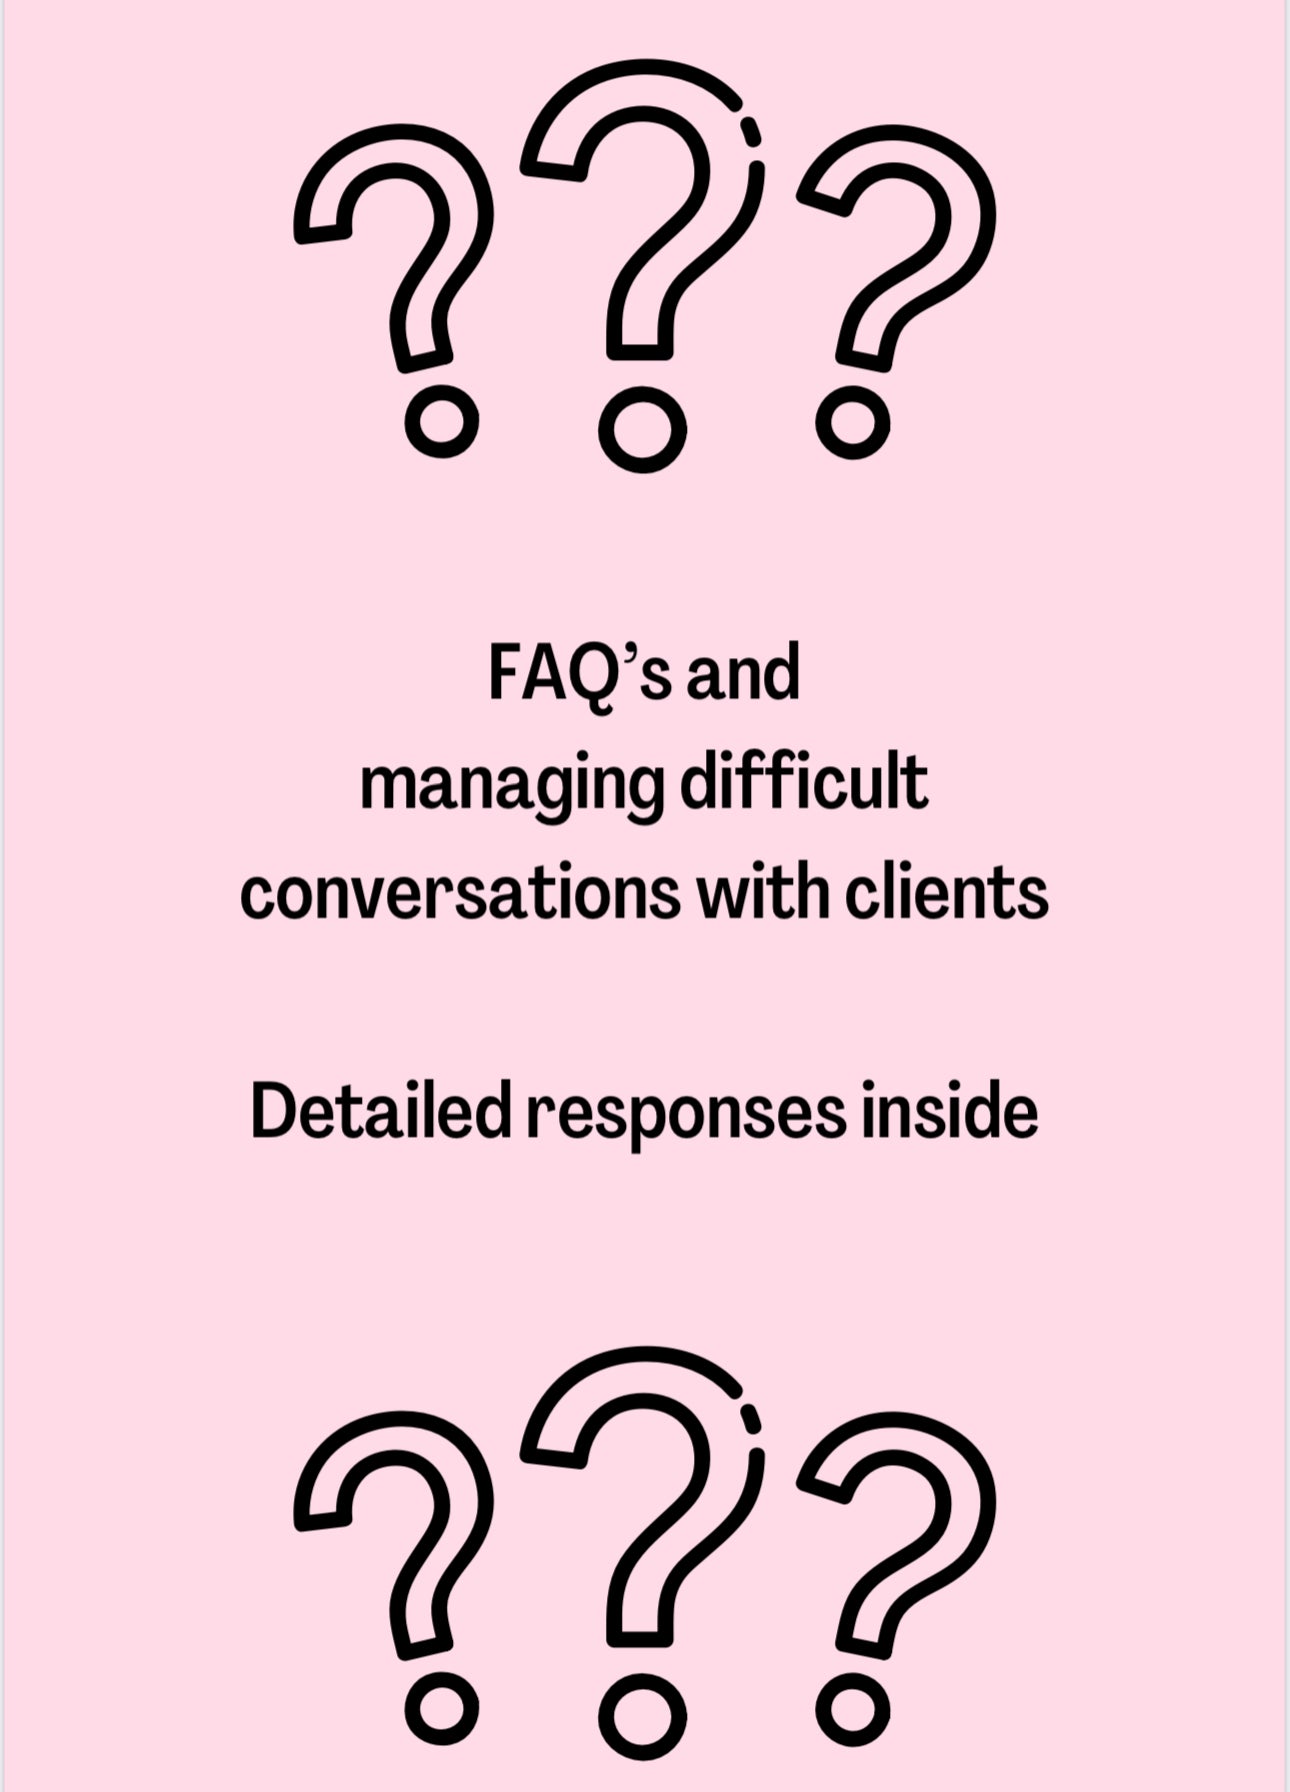 FAQs How To Manage Difficult Conversations